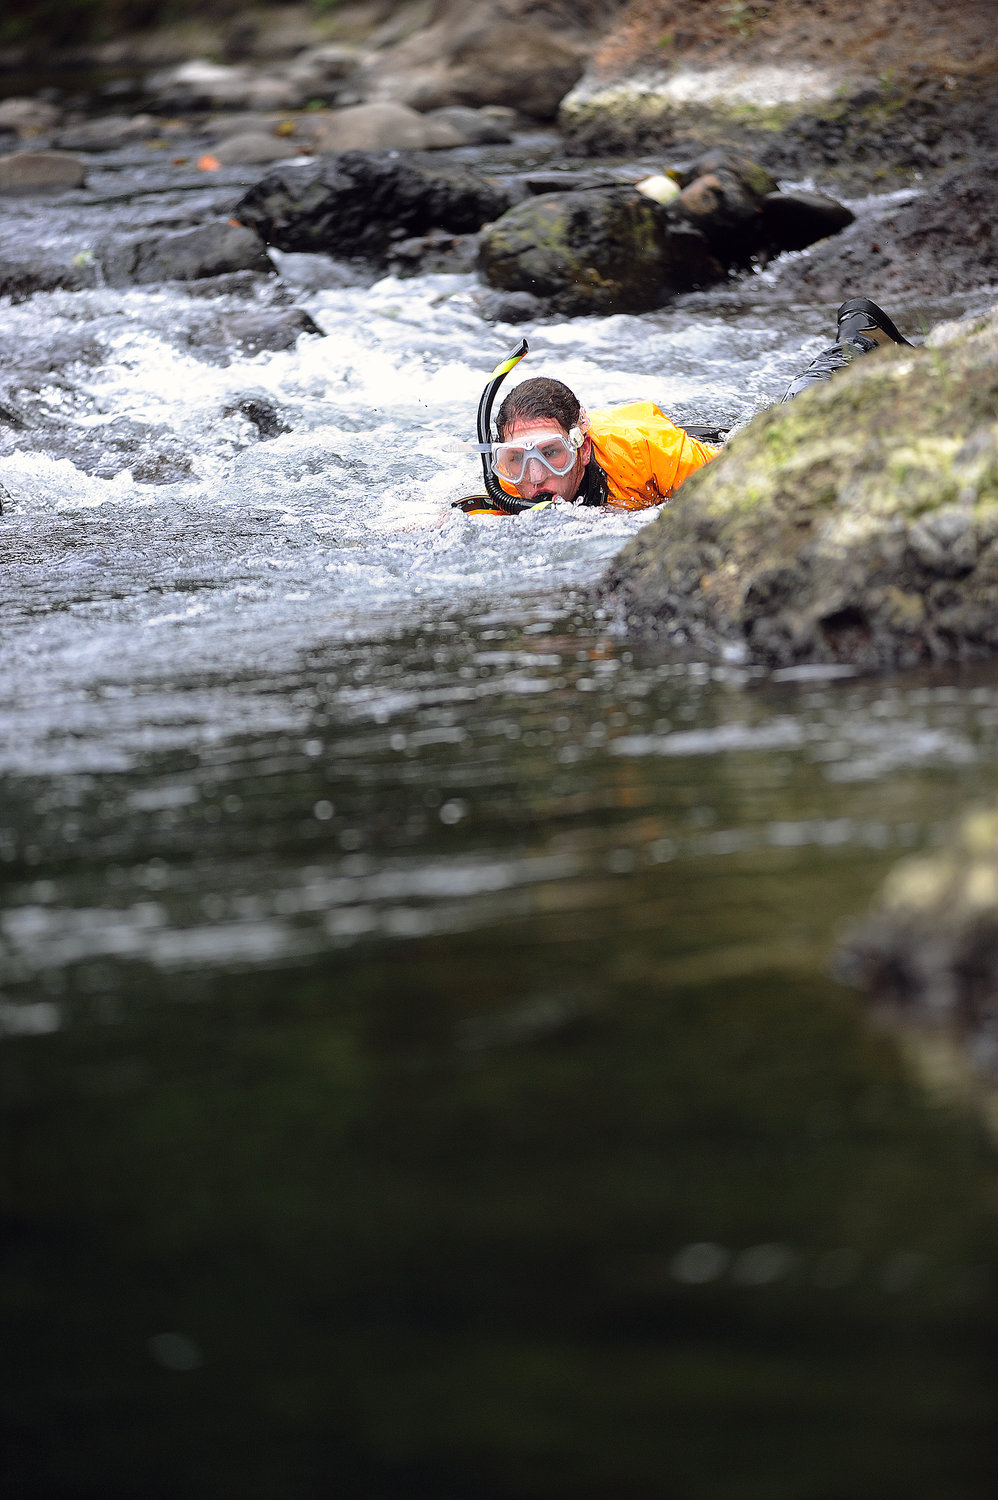 Amy Edwards of the Washington Department of Fish and Wildlife maneuvers her way down a rocky portion of the Chehalis River as she inventories wildlife in the river on Monday outside Pe Ell.